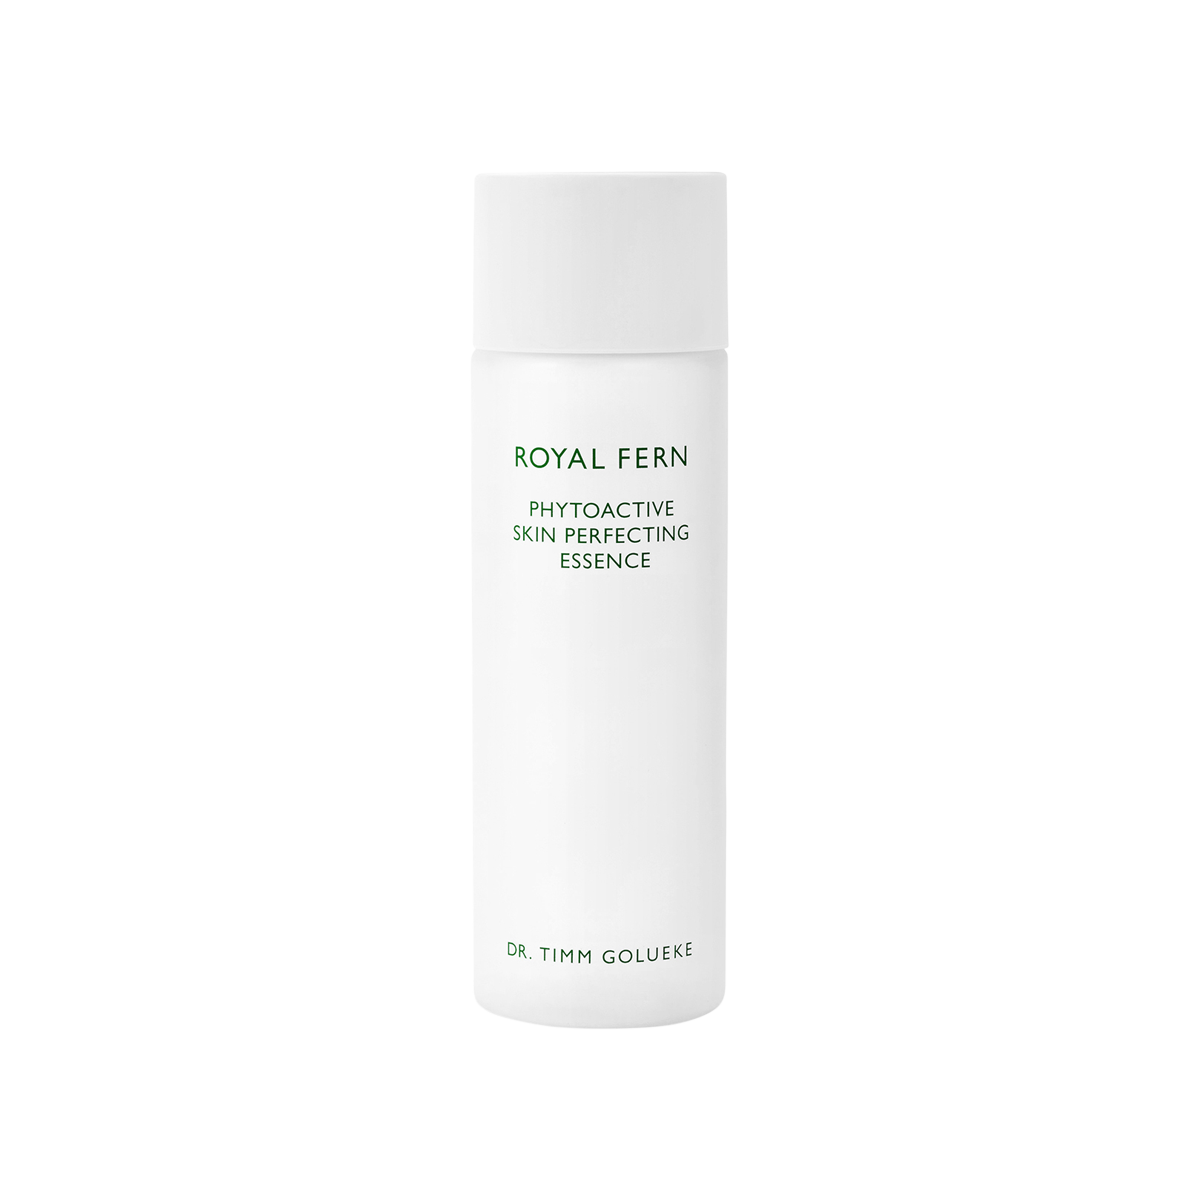 Royal Fern - Phytoactive Skin-Perfecting Essence